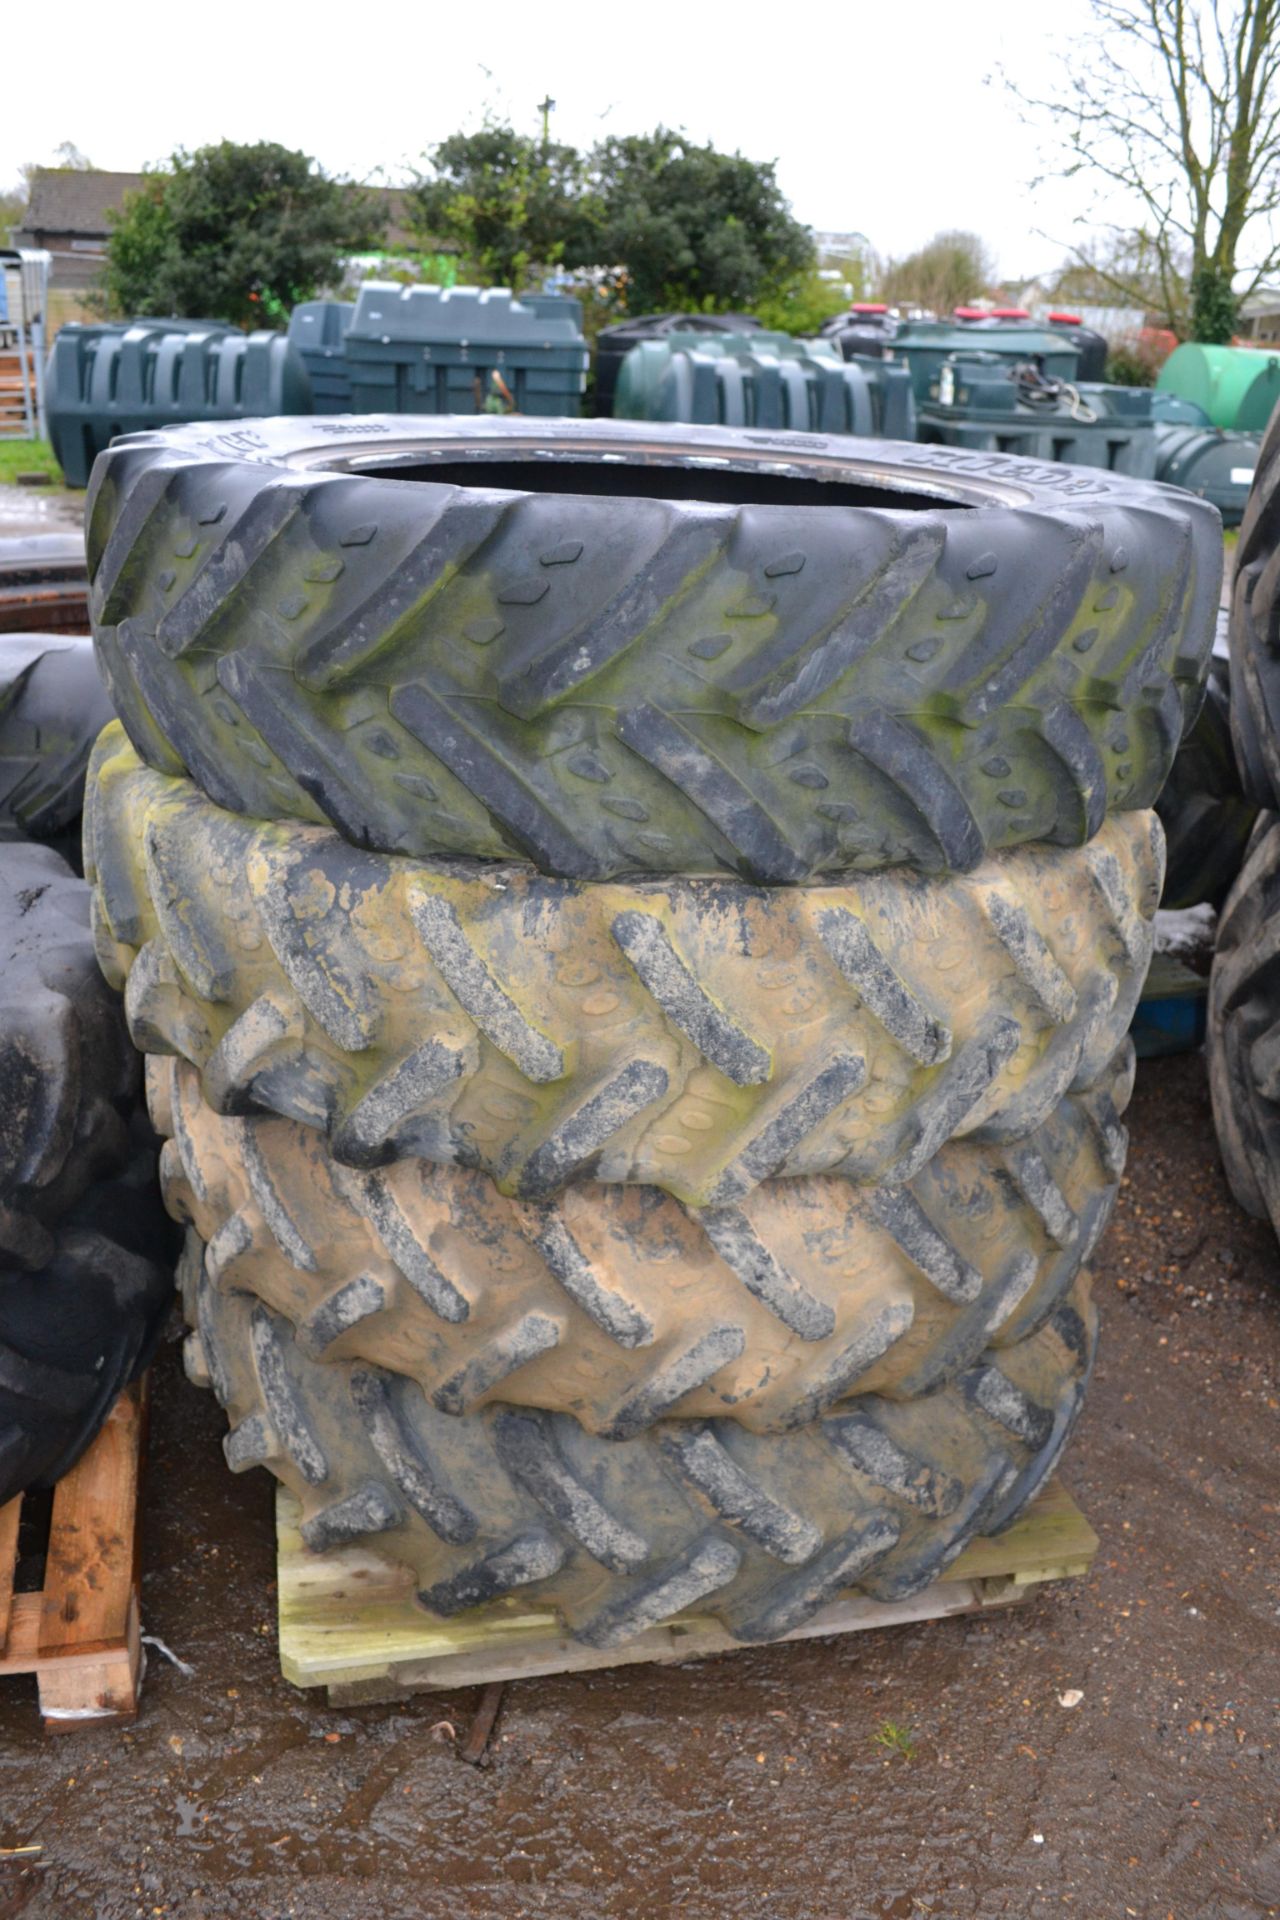 4x 320/85R32 row crop tyres to fit Bateman RB25 sprayer. One requires an inner tube. V